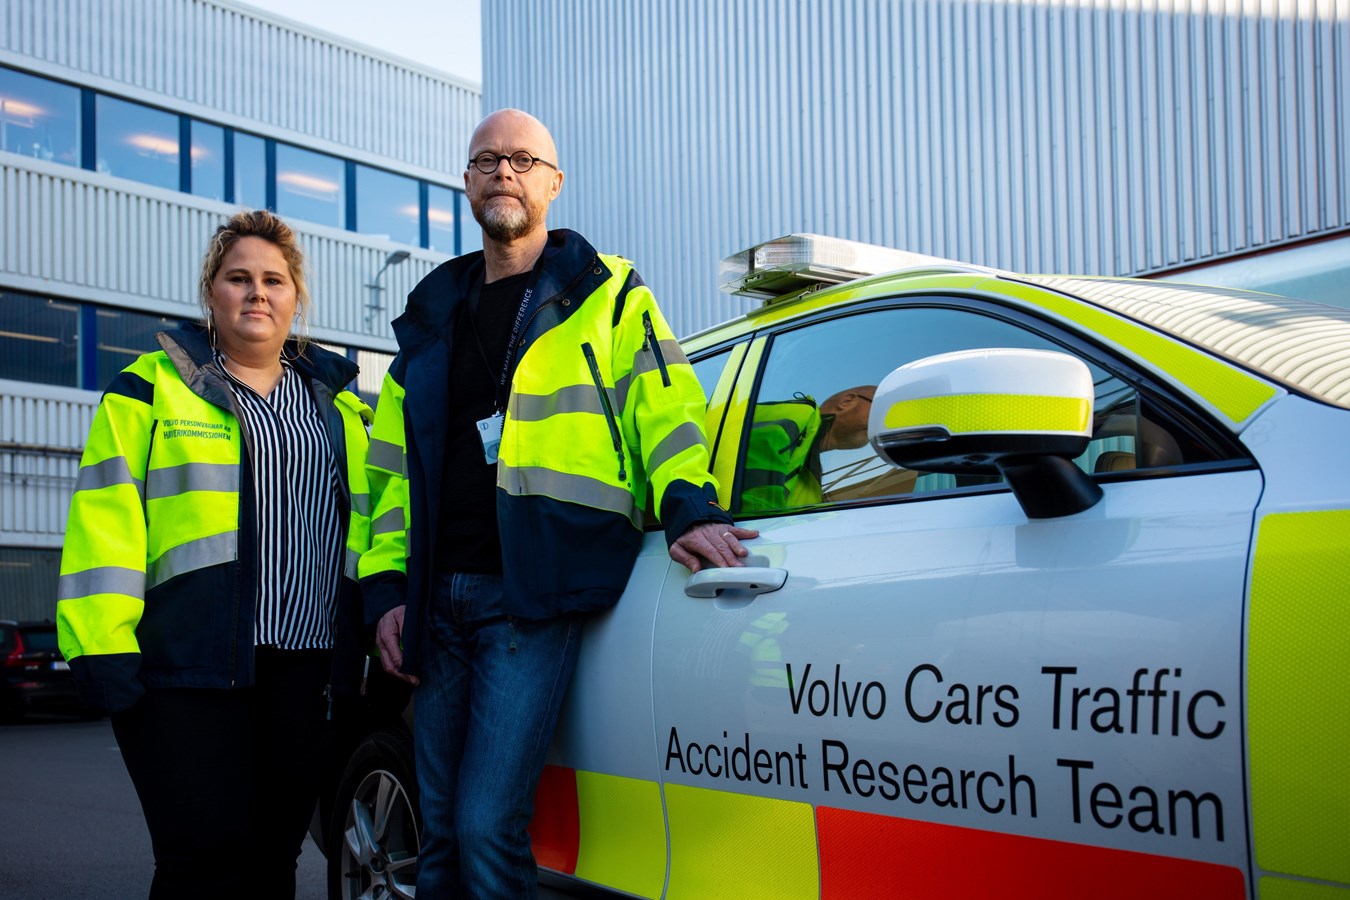 Volvo's Accident Research Team